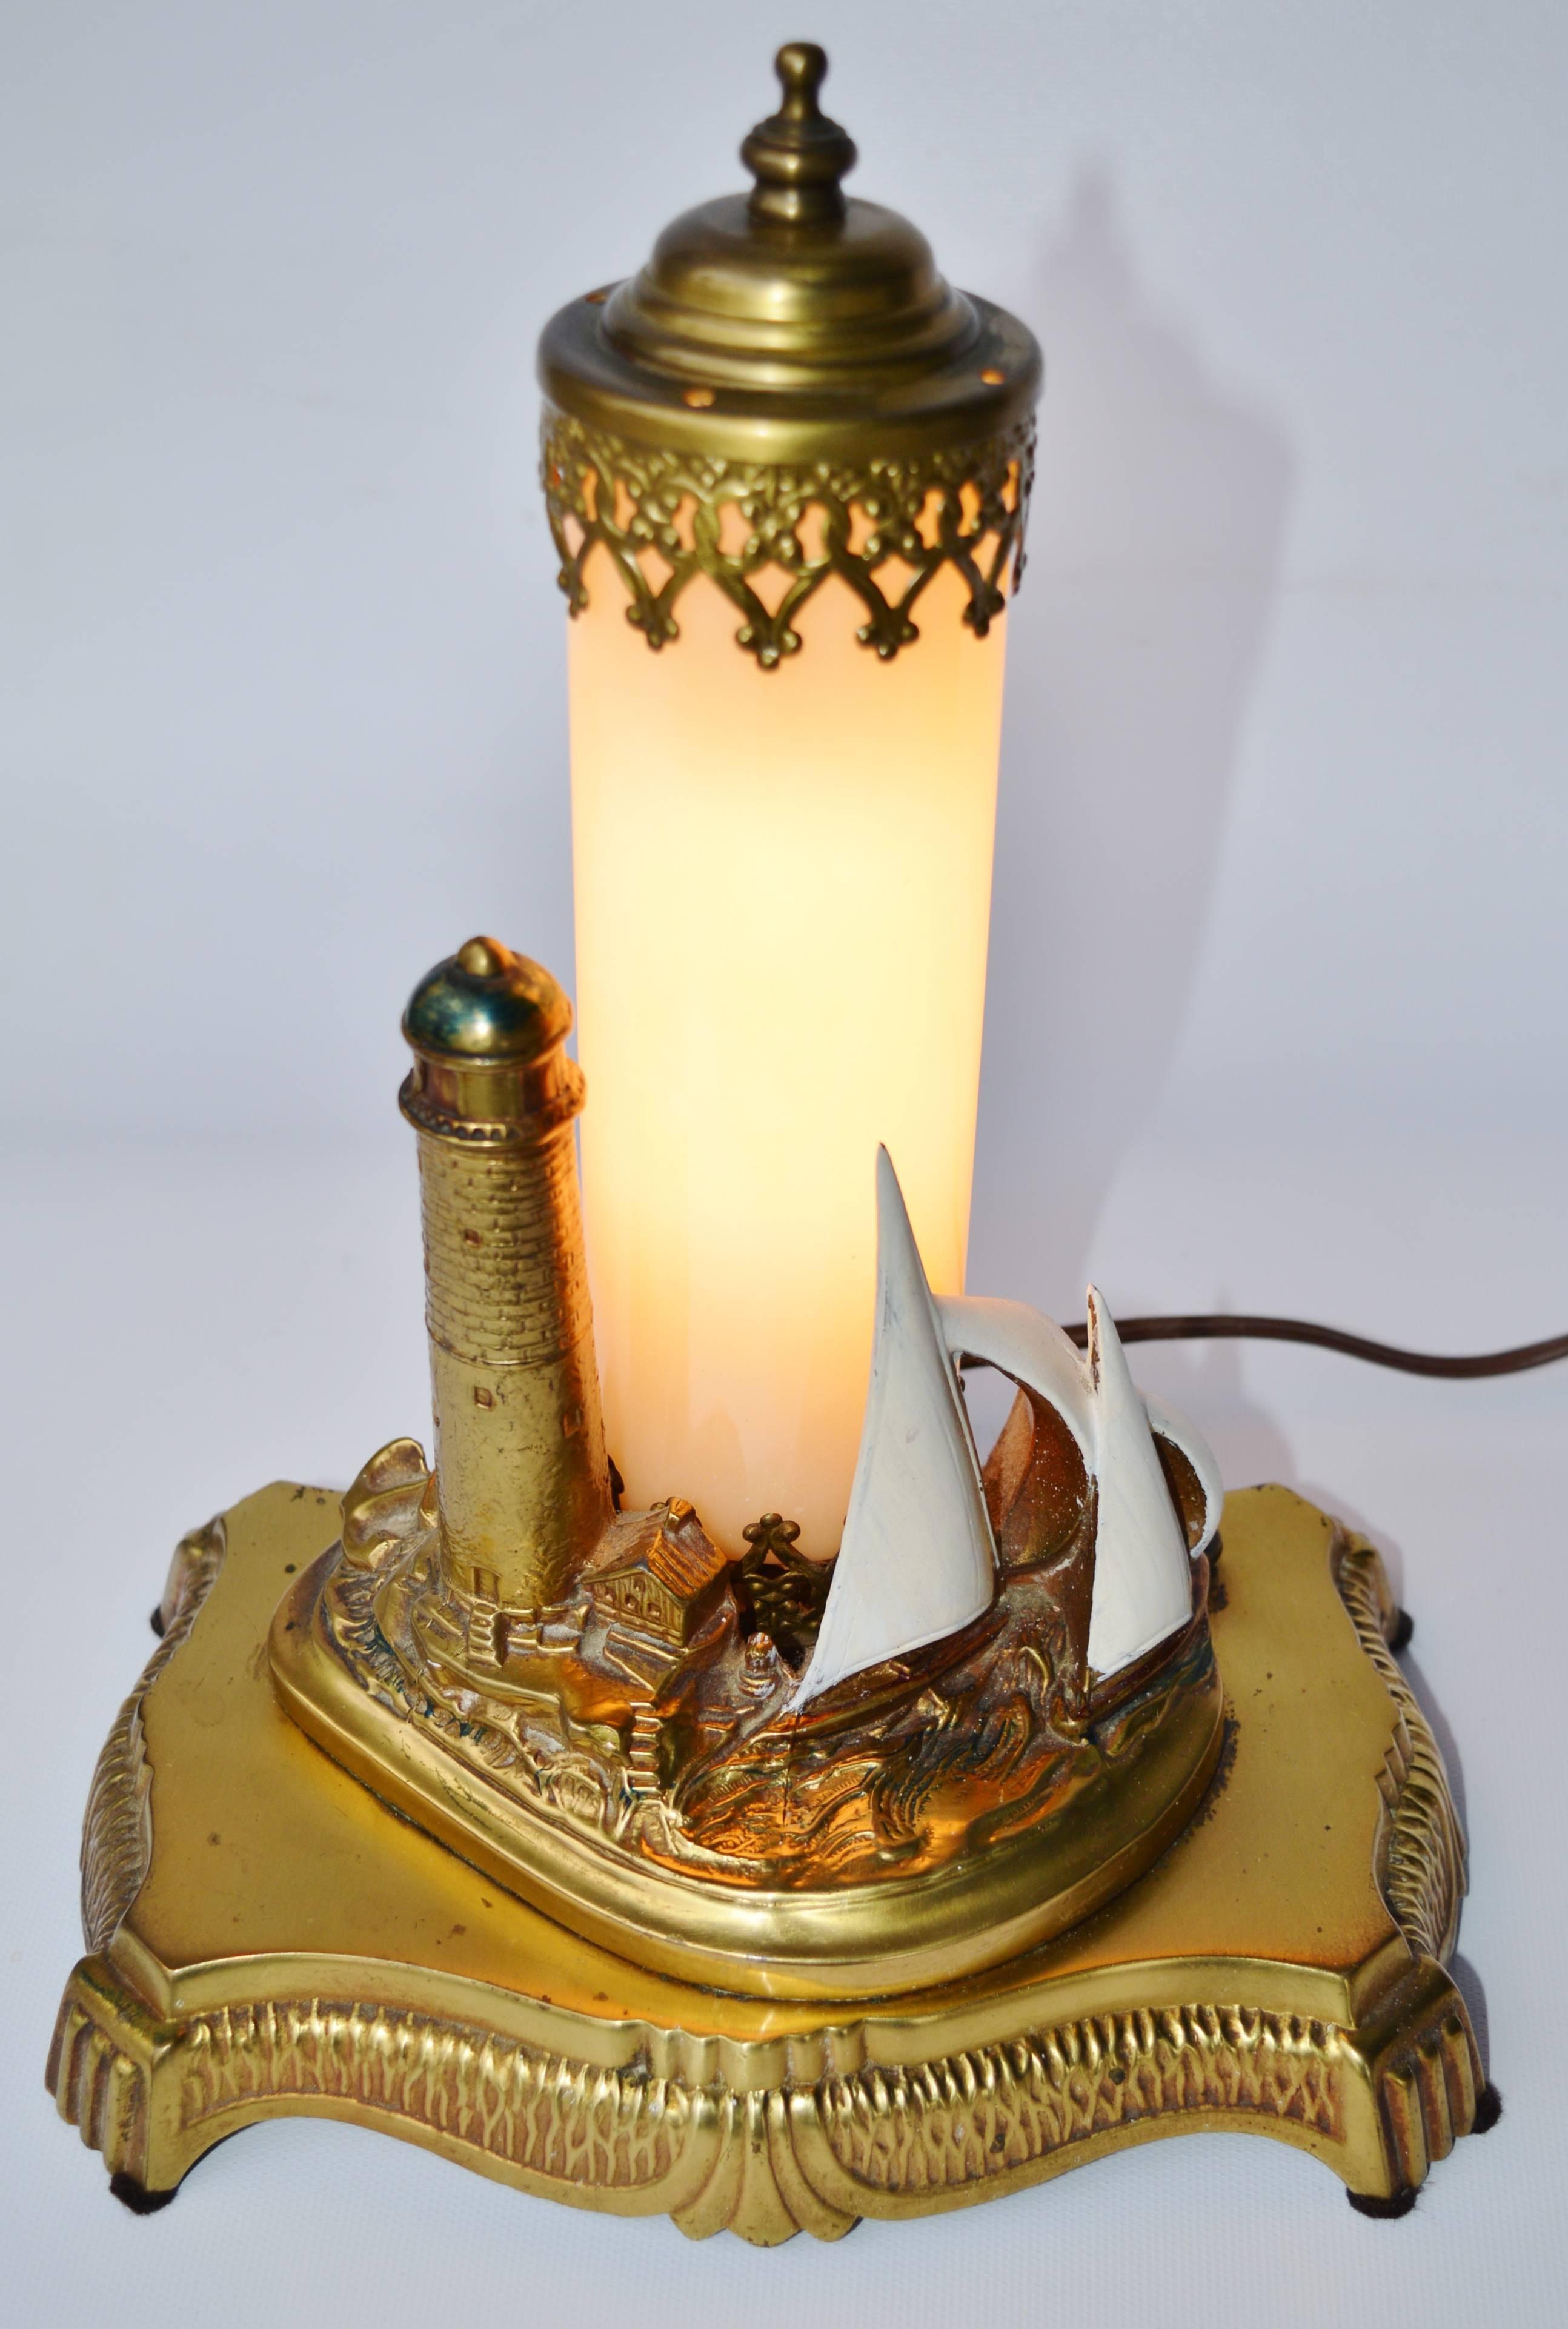 Antique Brass Lighthouse Lamp with Opalescent Glass In Excellent Condition For Sale In New Westminster, British Columbia